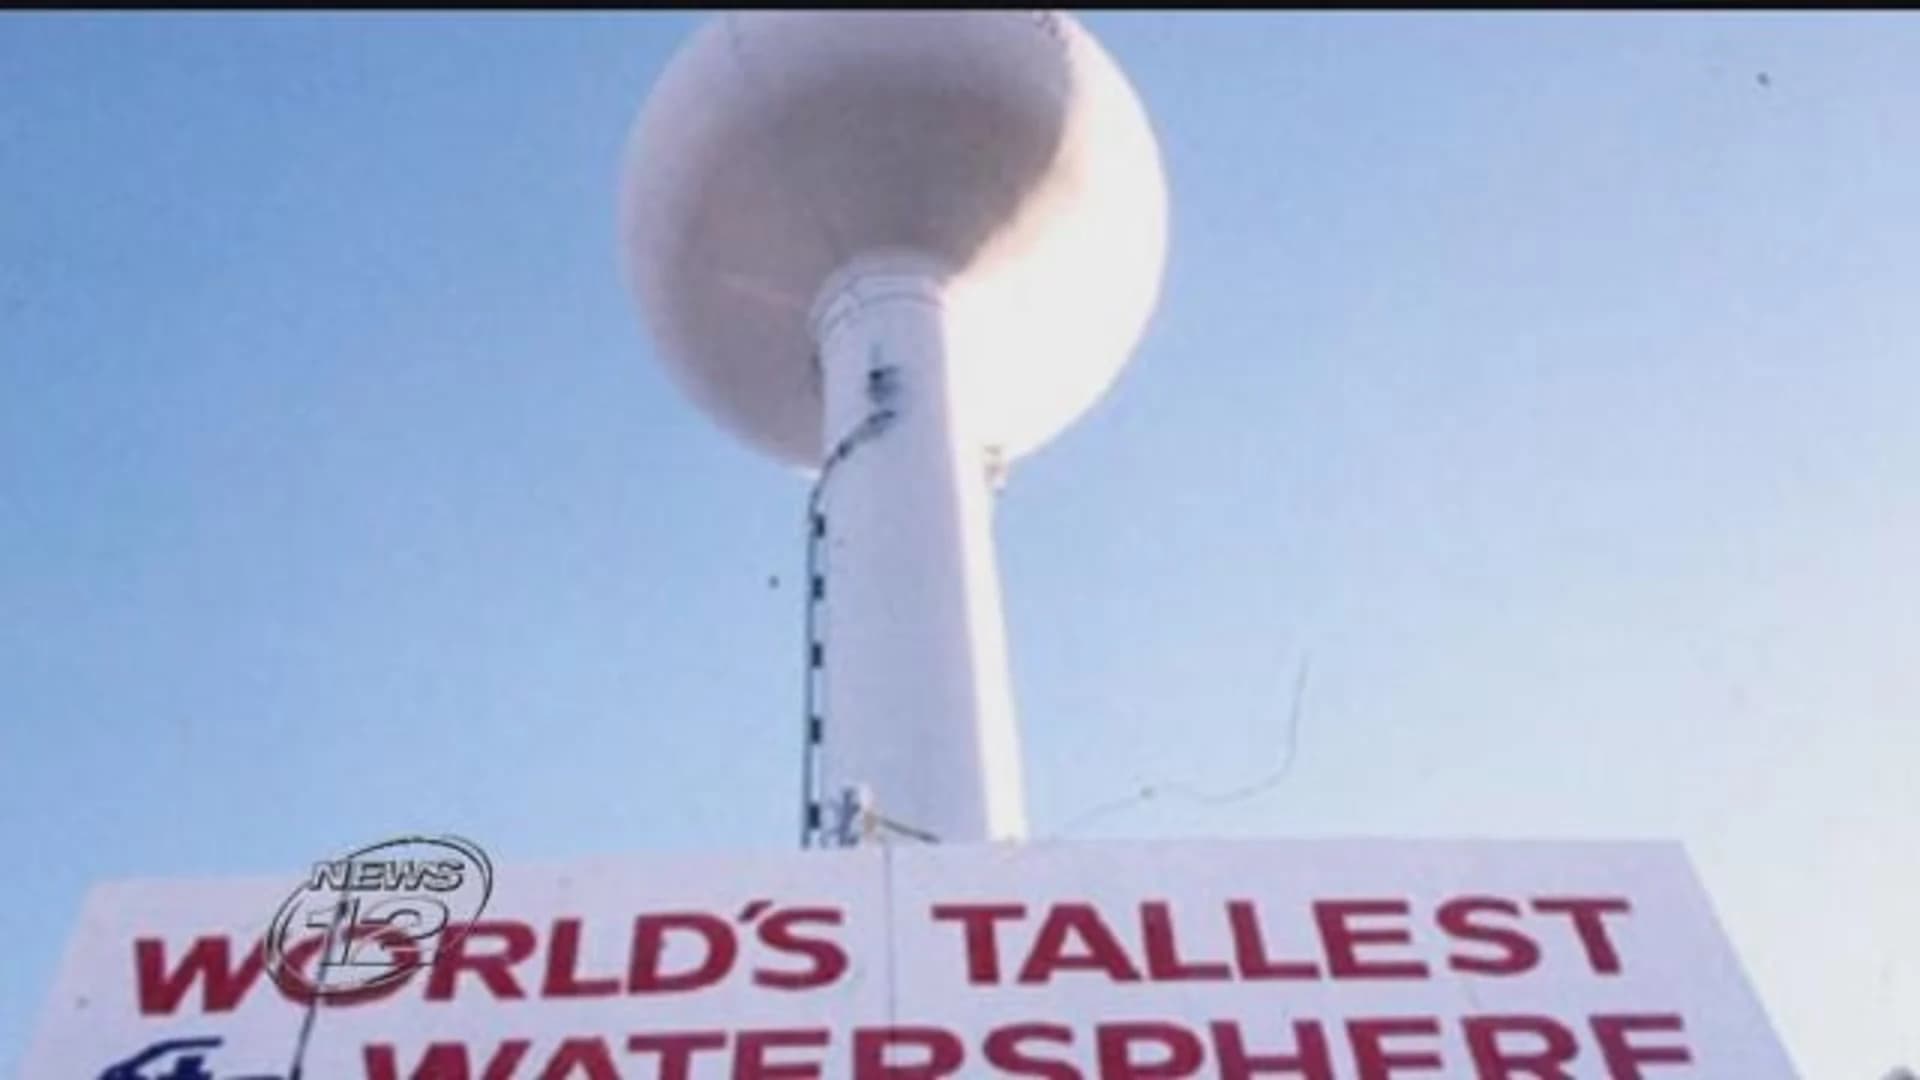 Texas man runs museum dedicated to New Jersey’s famous water sphere